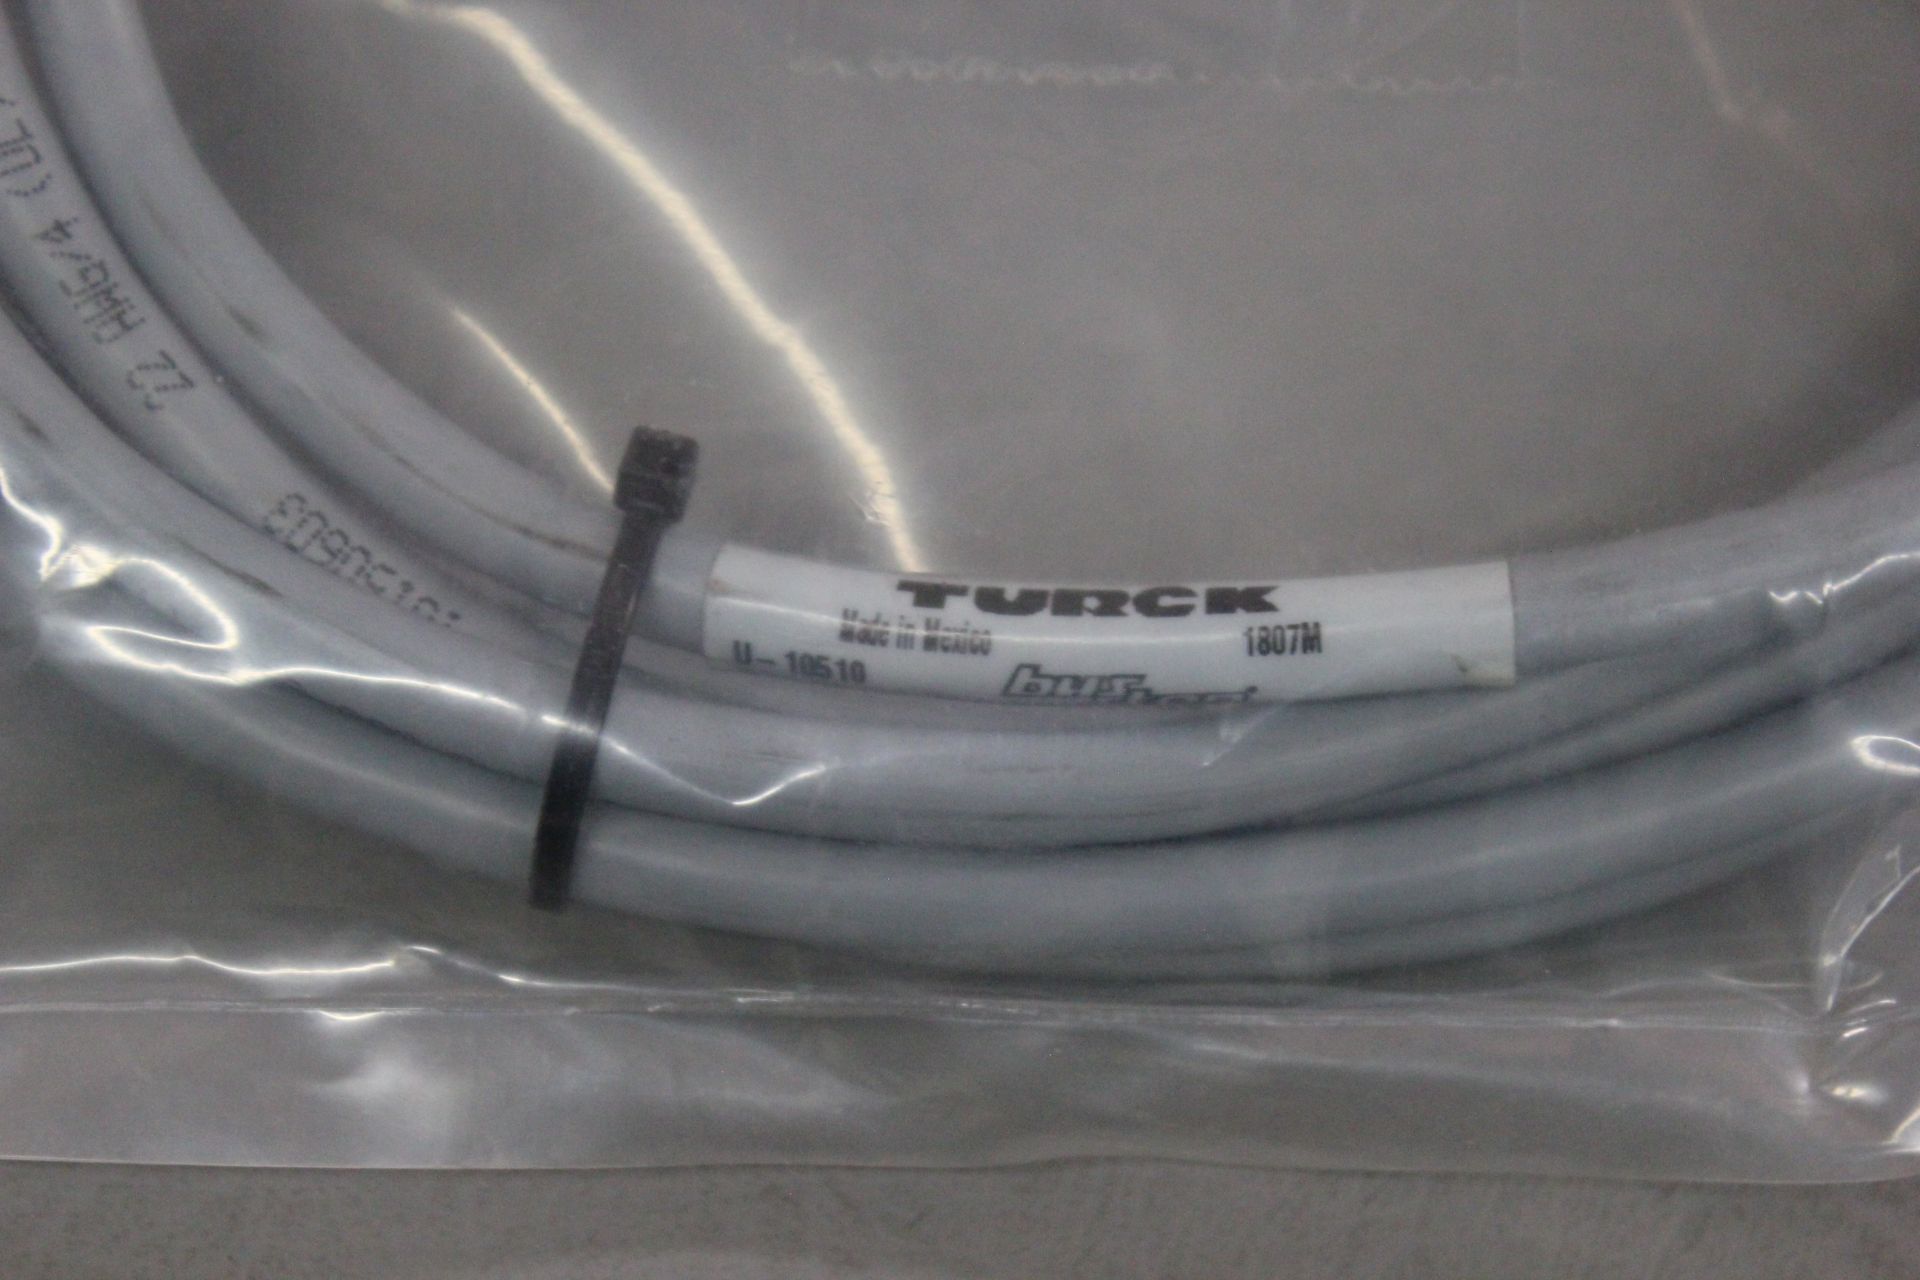 LOT OF NEW TURCK CABLES - Image 2 of 4